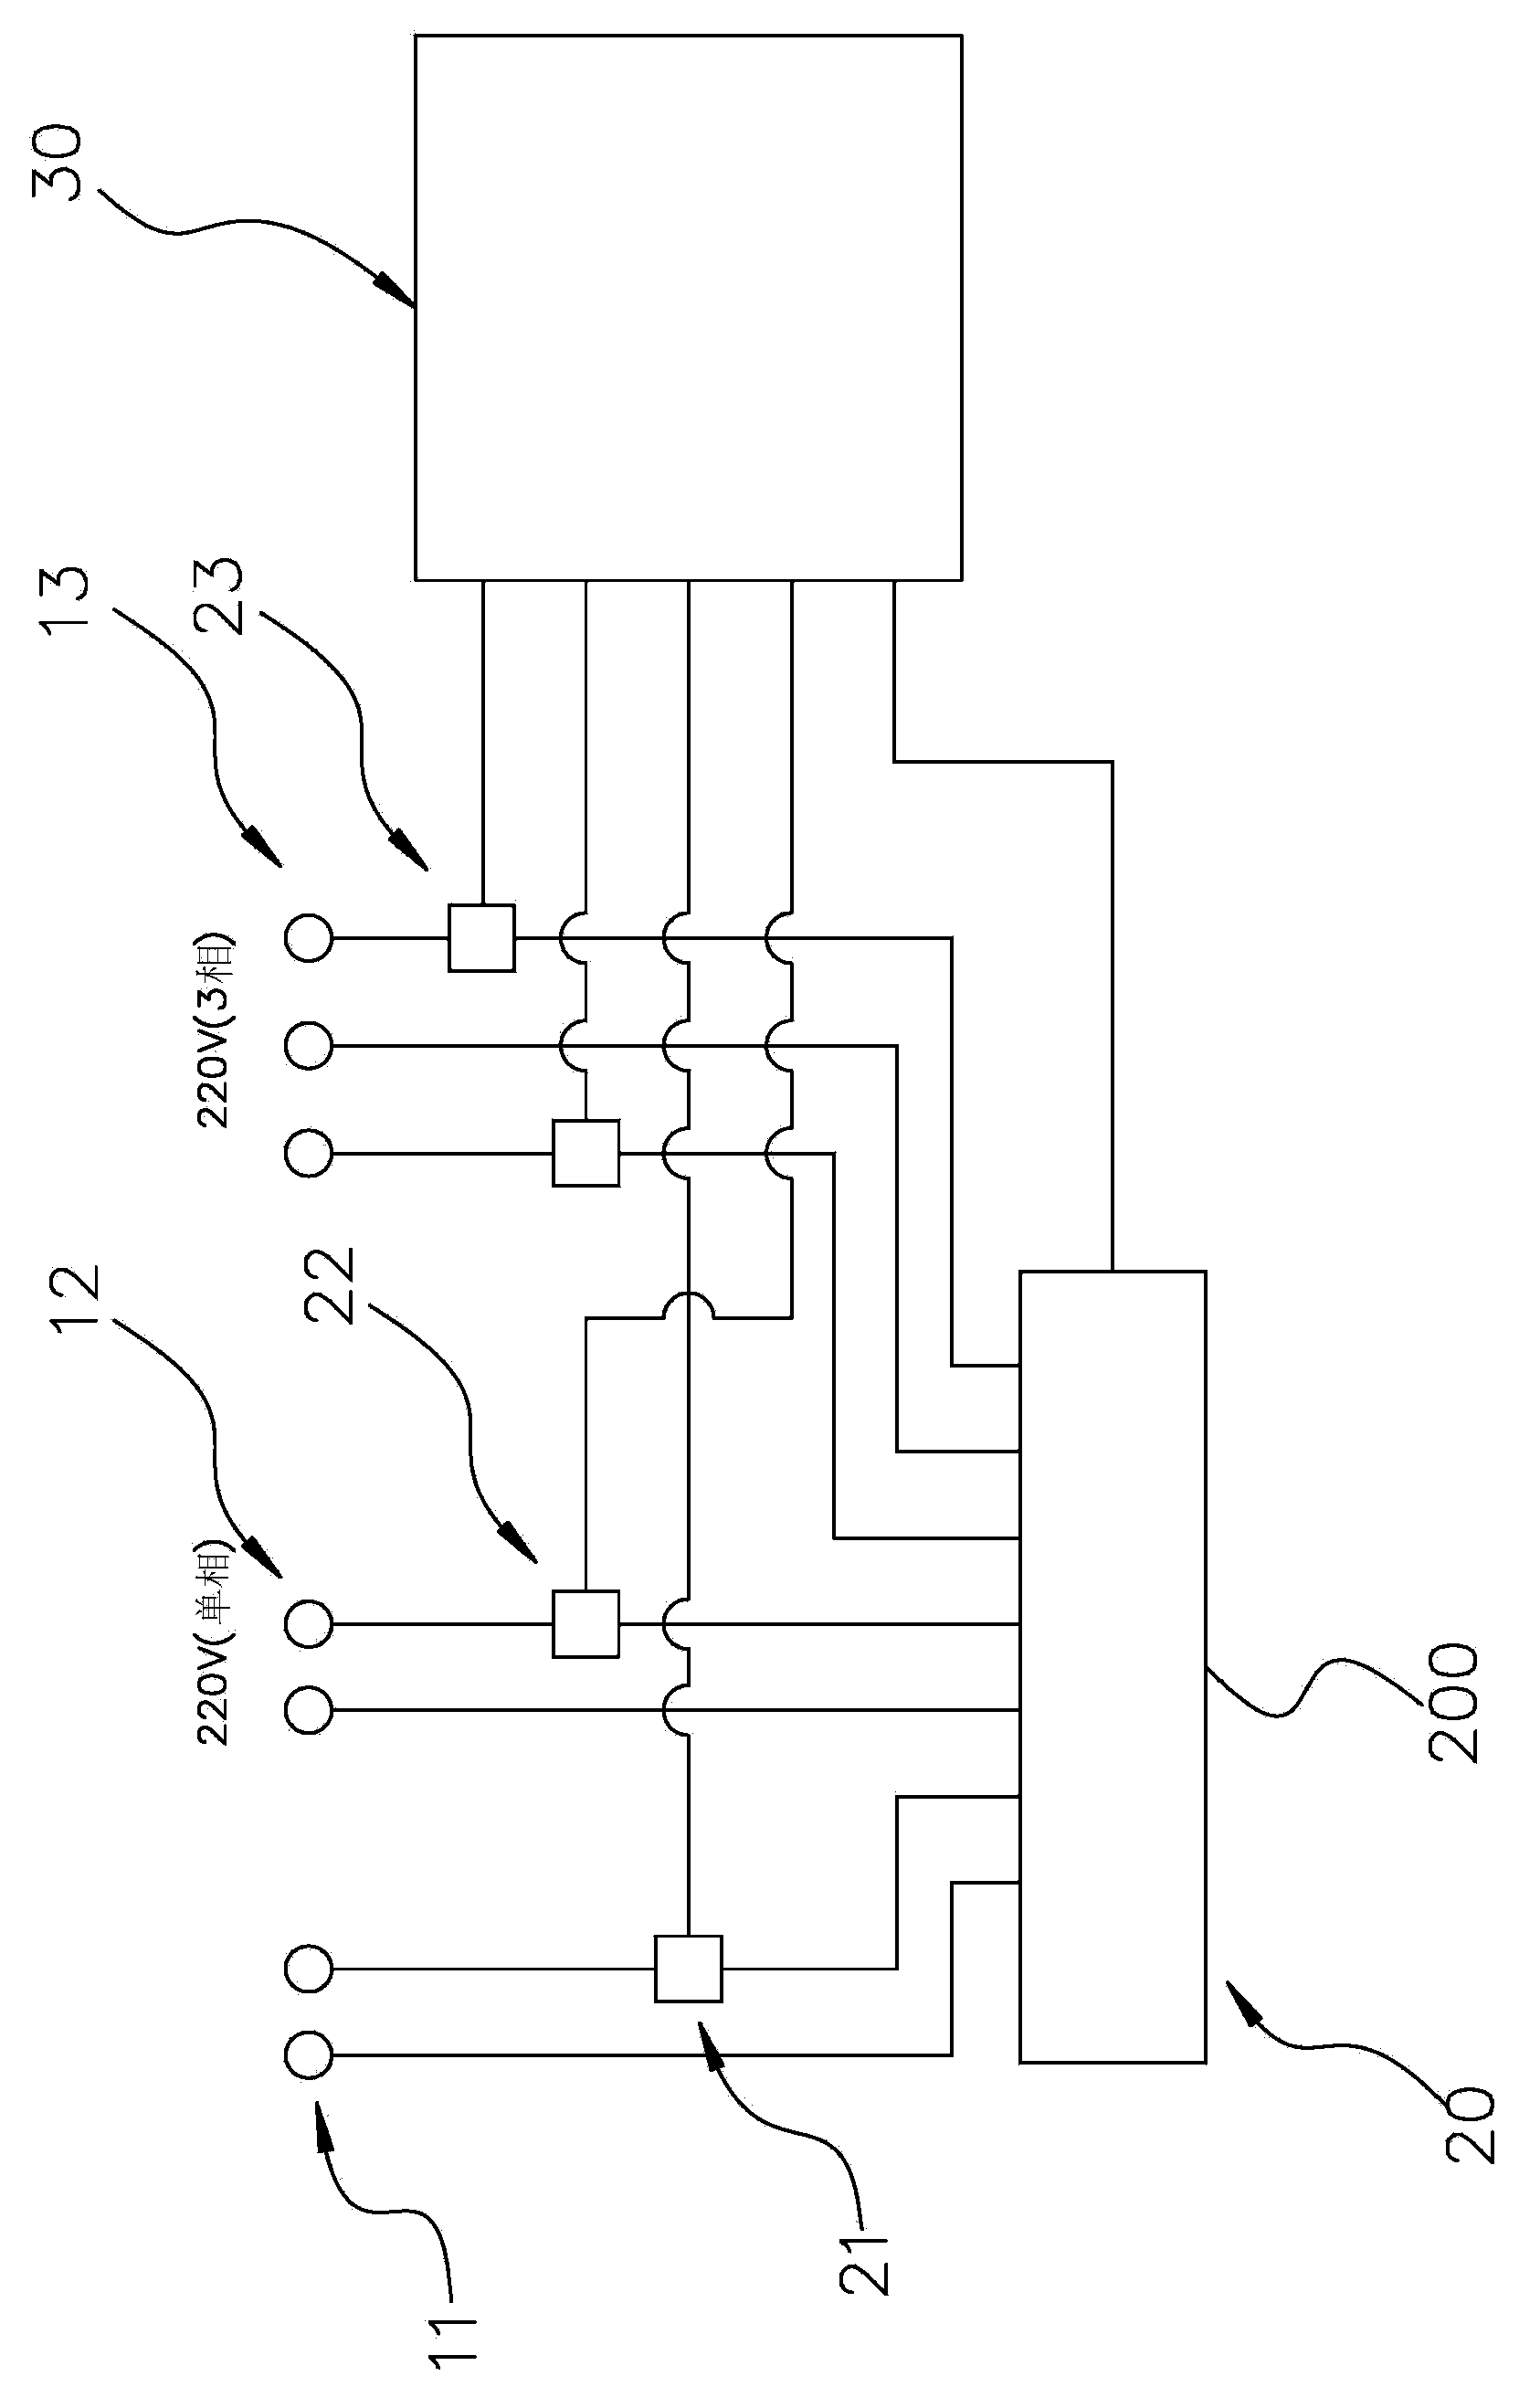 Quantifying system of electric leakage detecting device